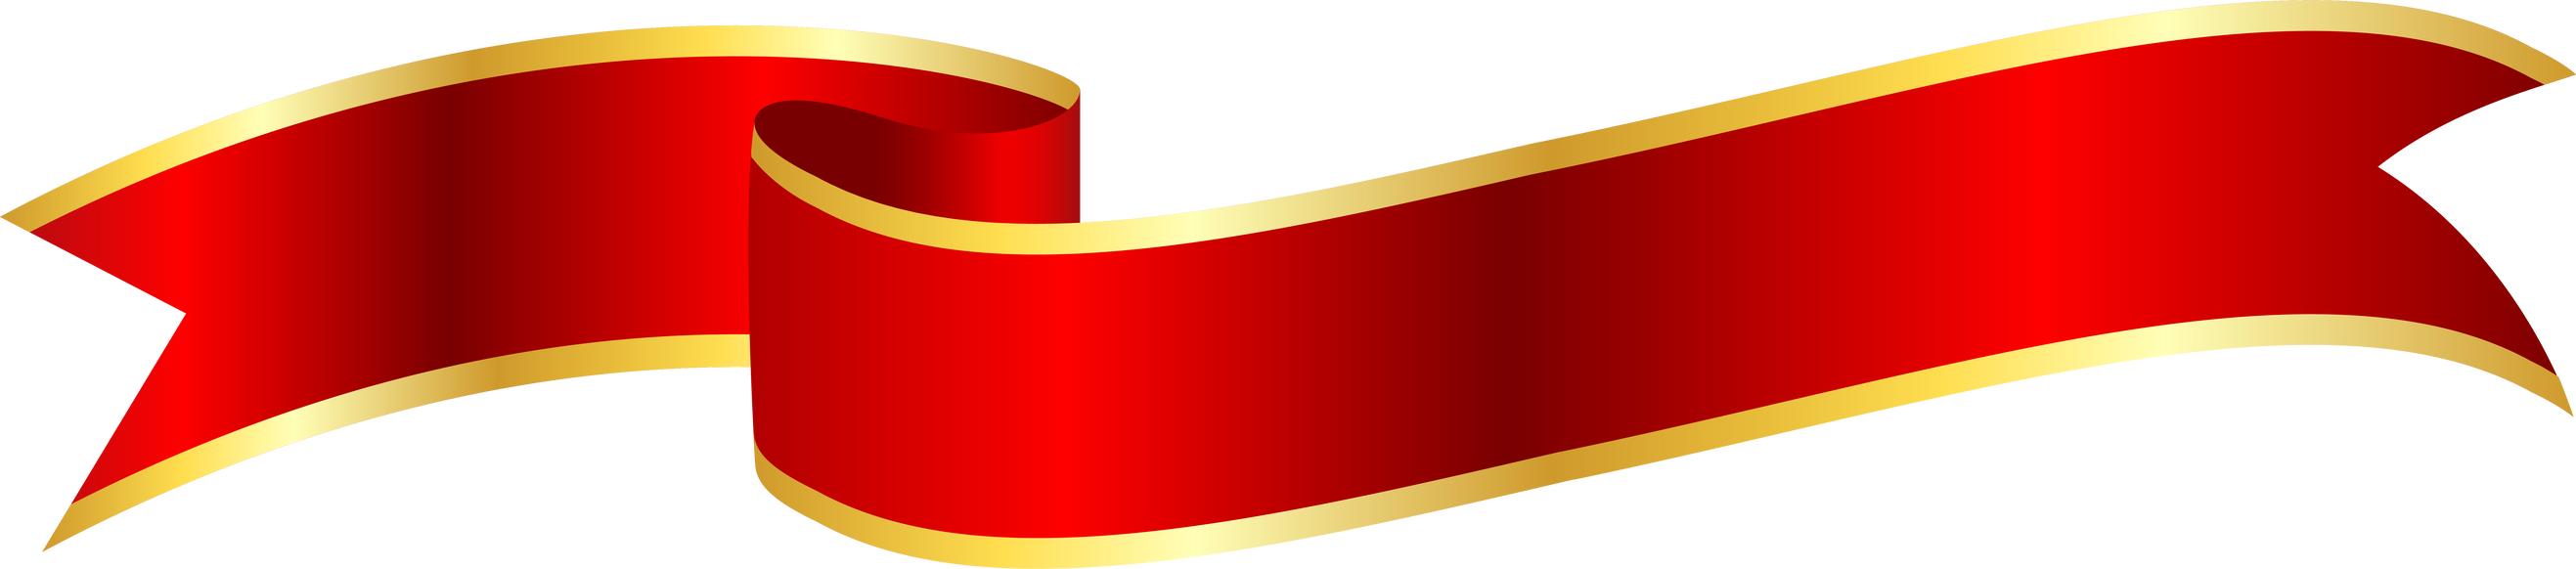 Red ribbon with gold stripes